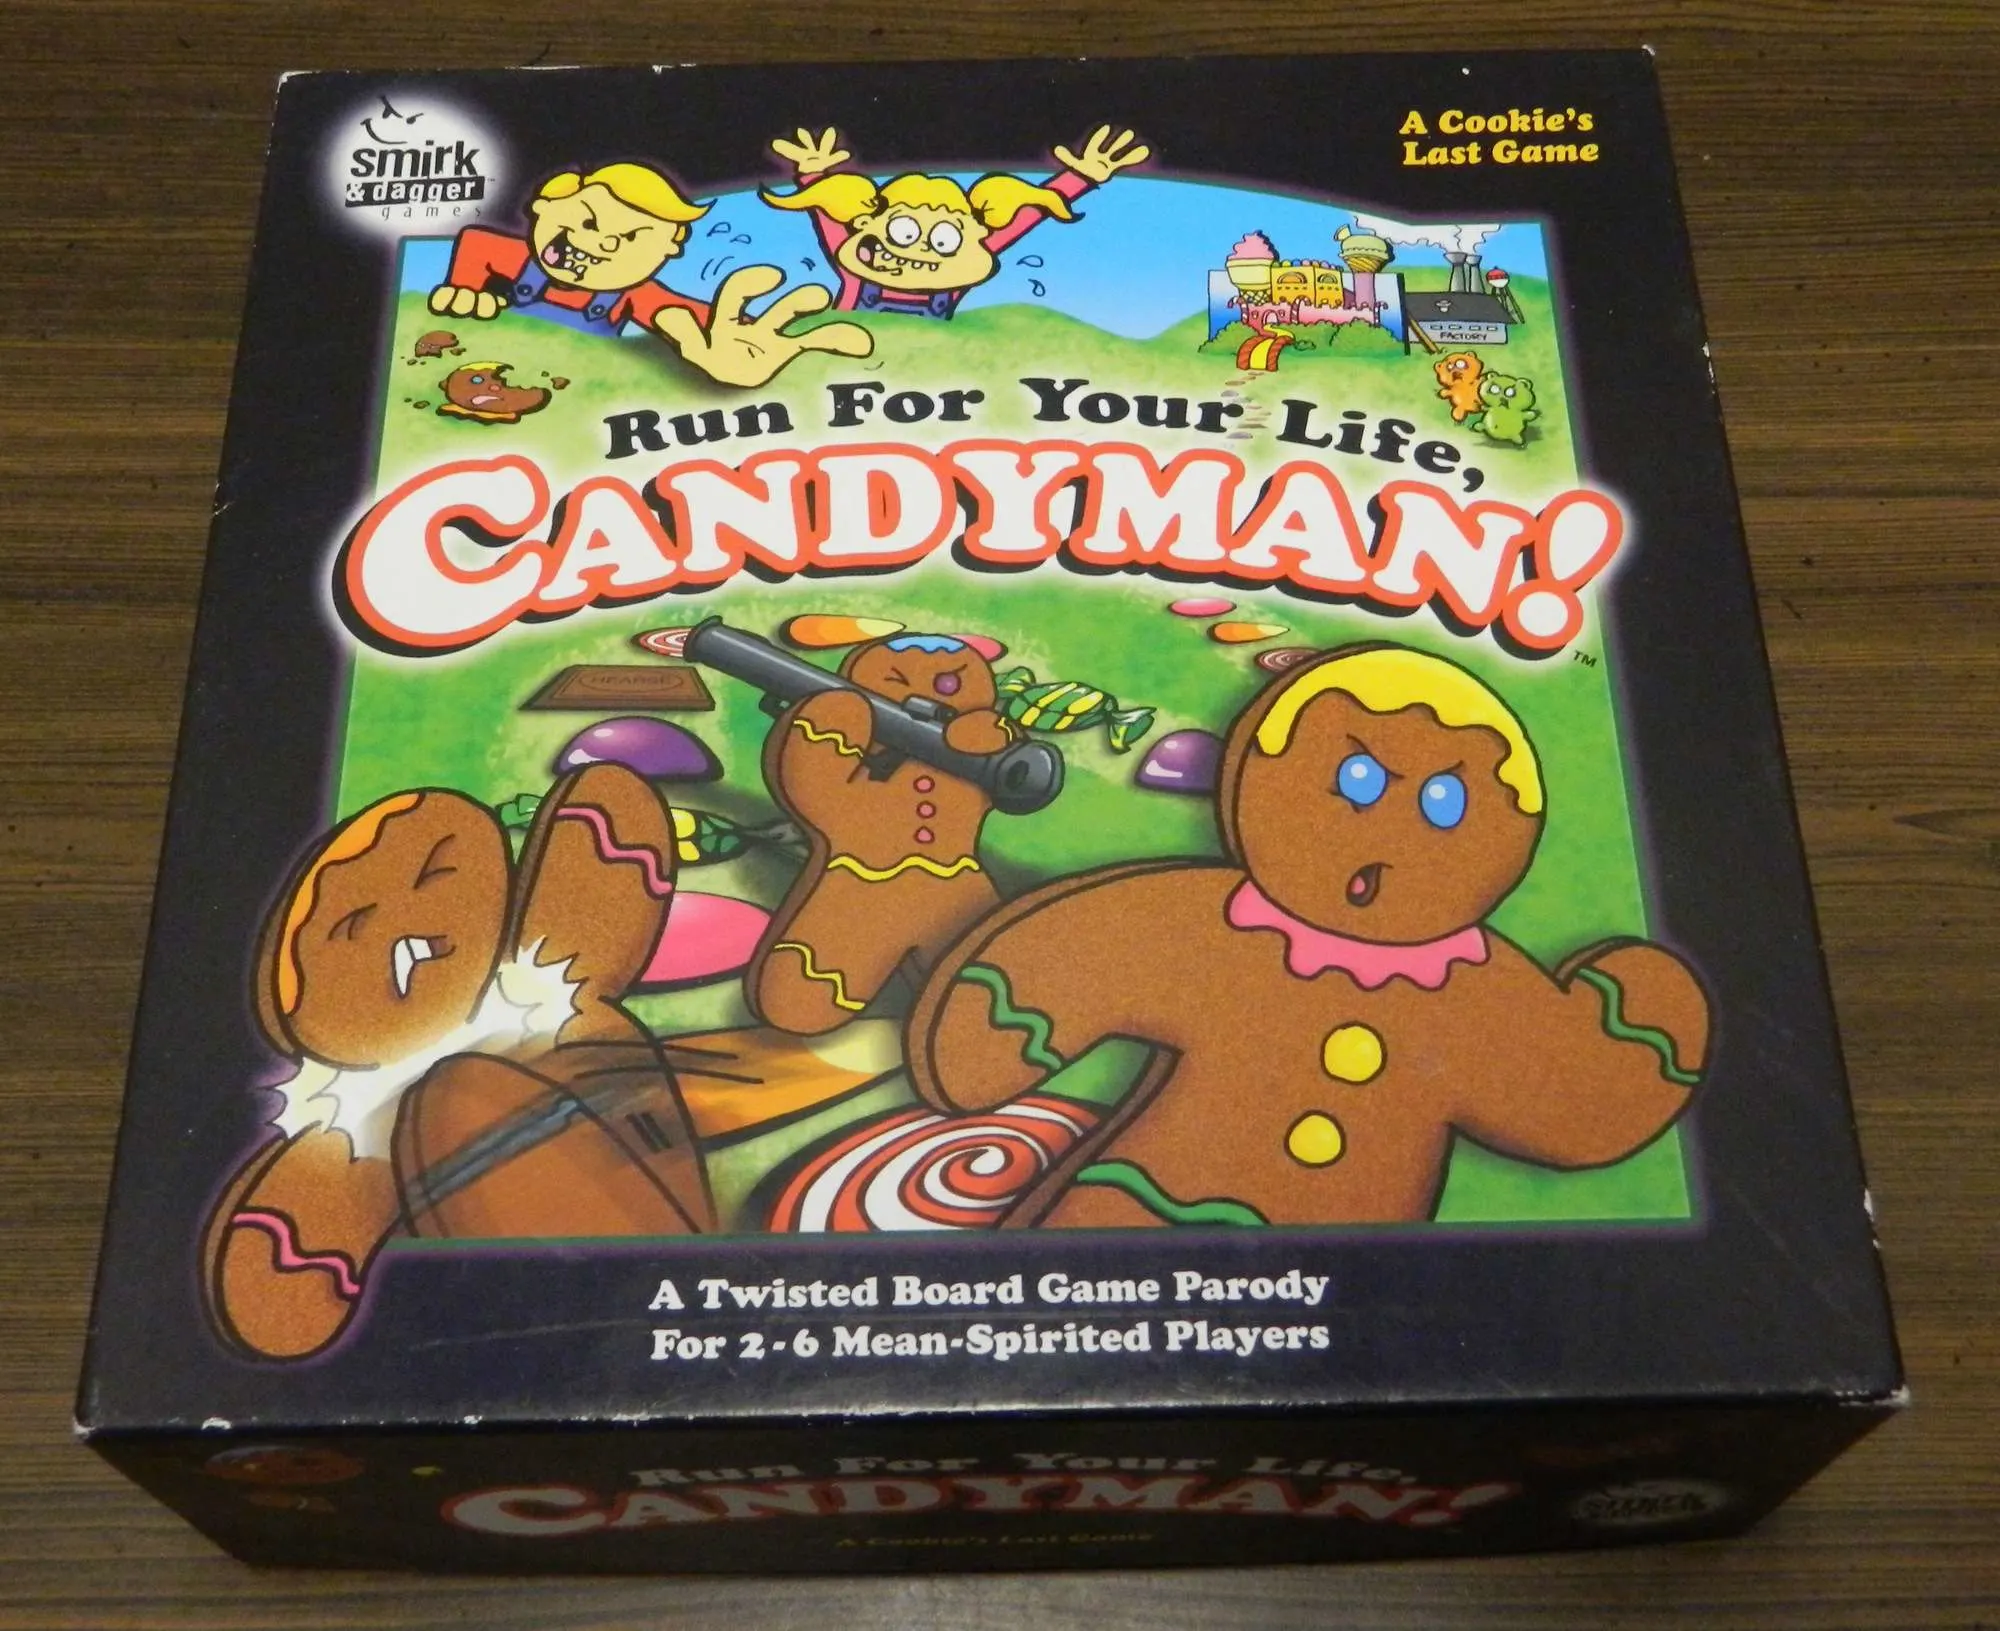 Candyman - We want to encourage you to try making some of